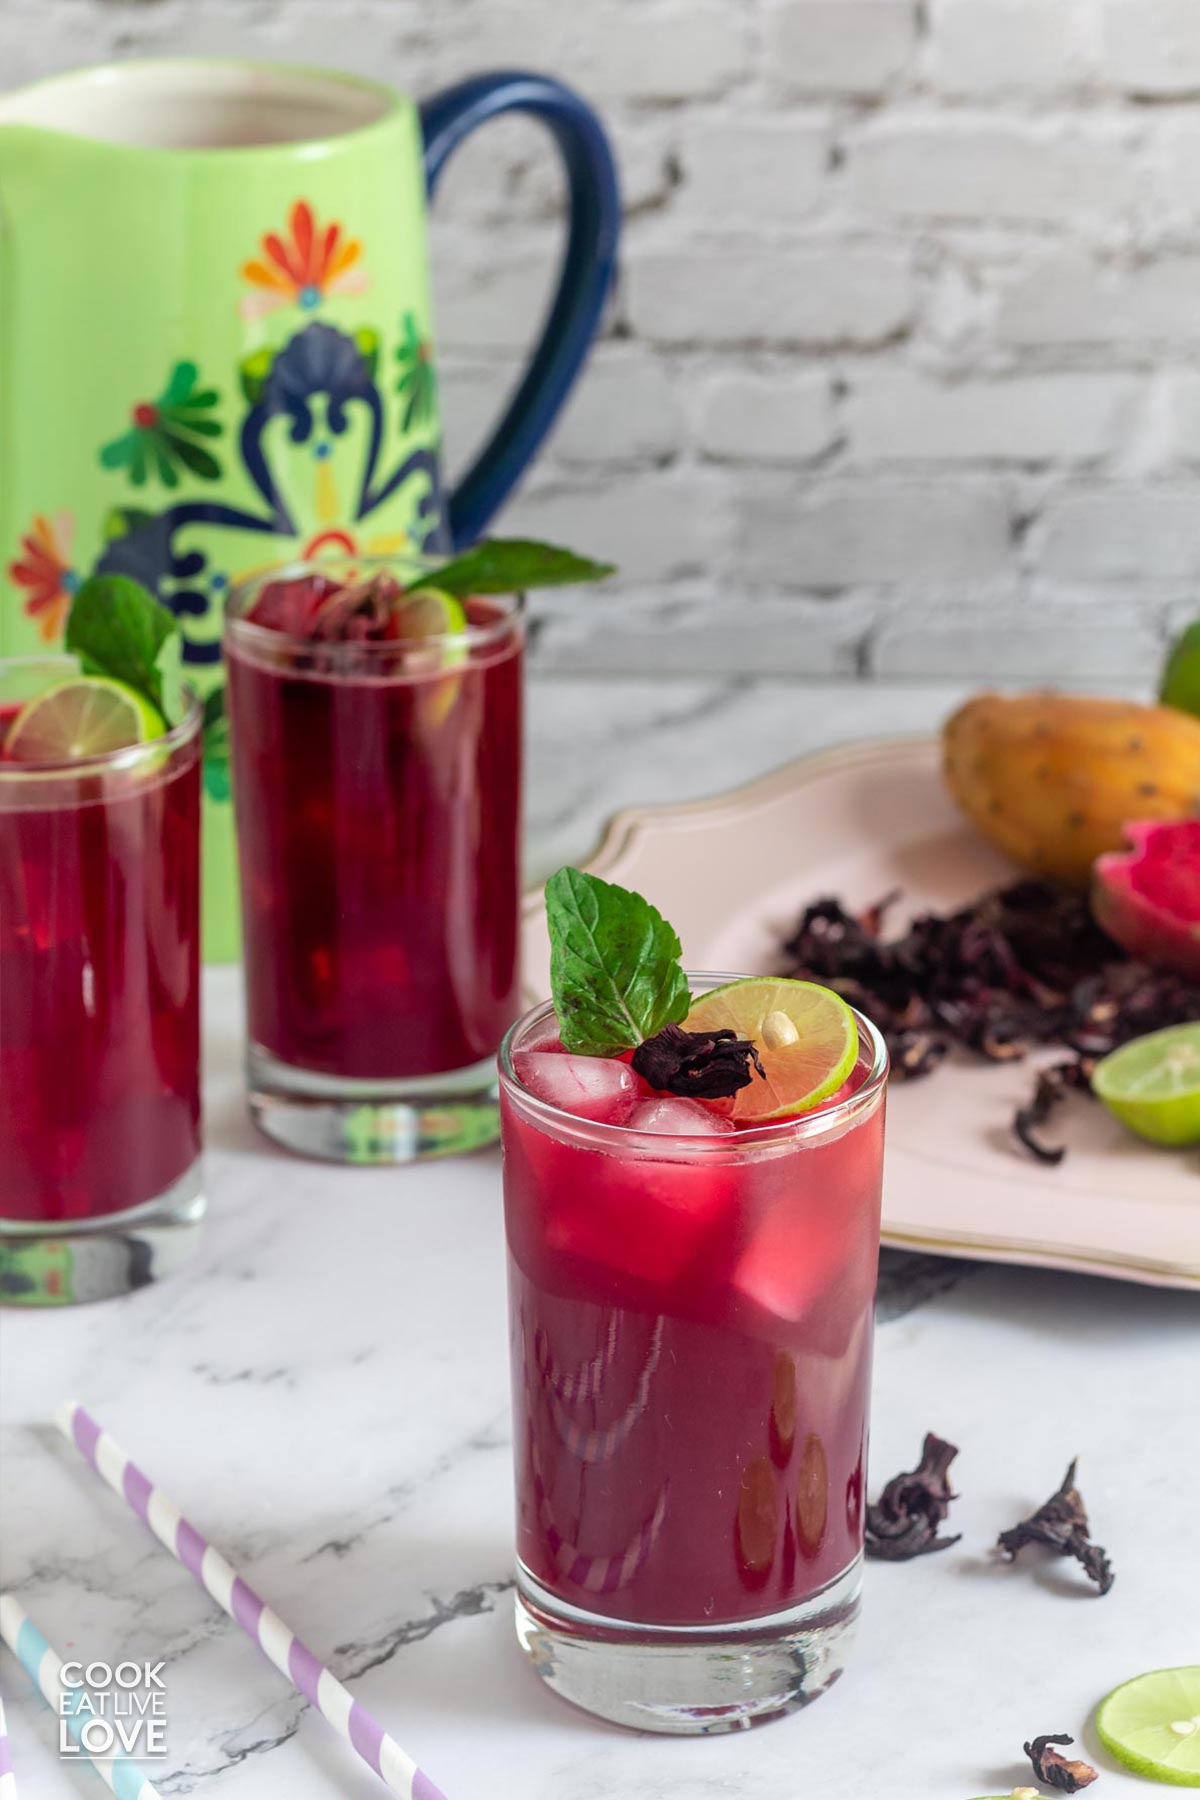 Glasses of fresh prickly pear water on the table with a plate of whole and halved fruits.